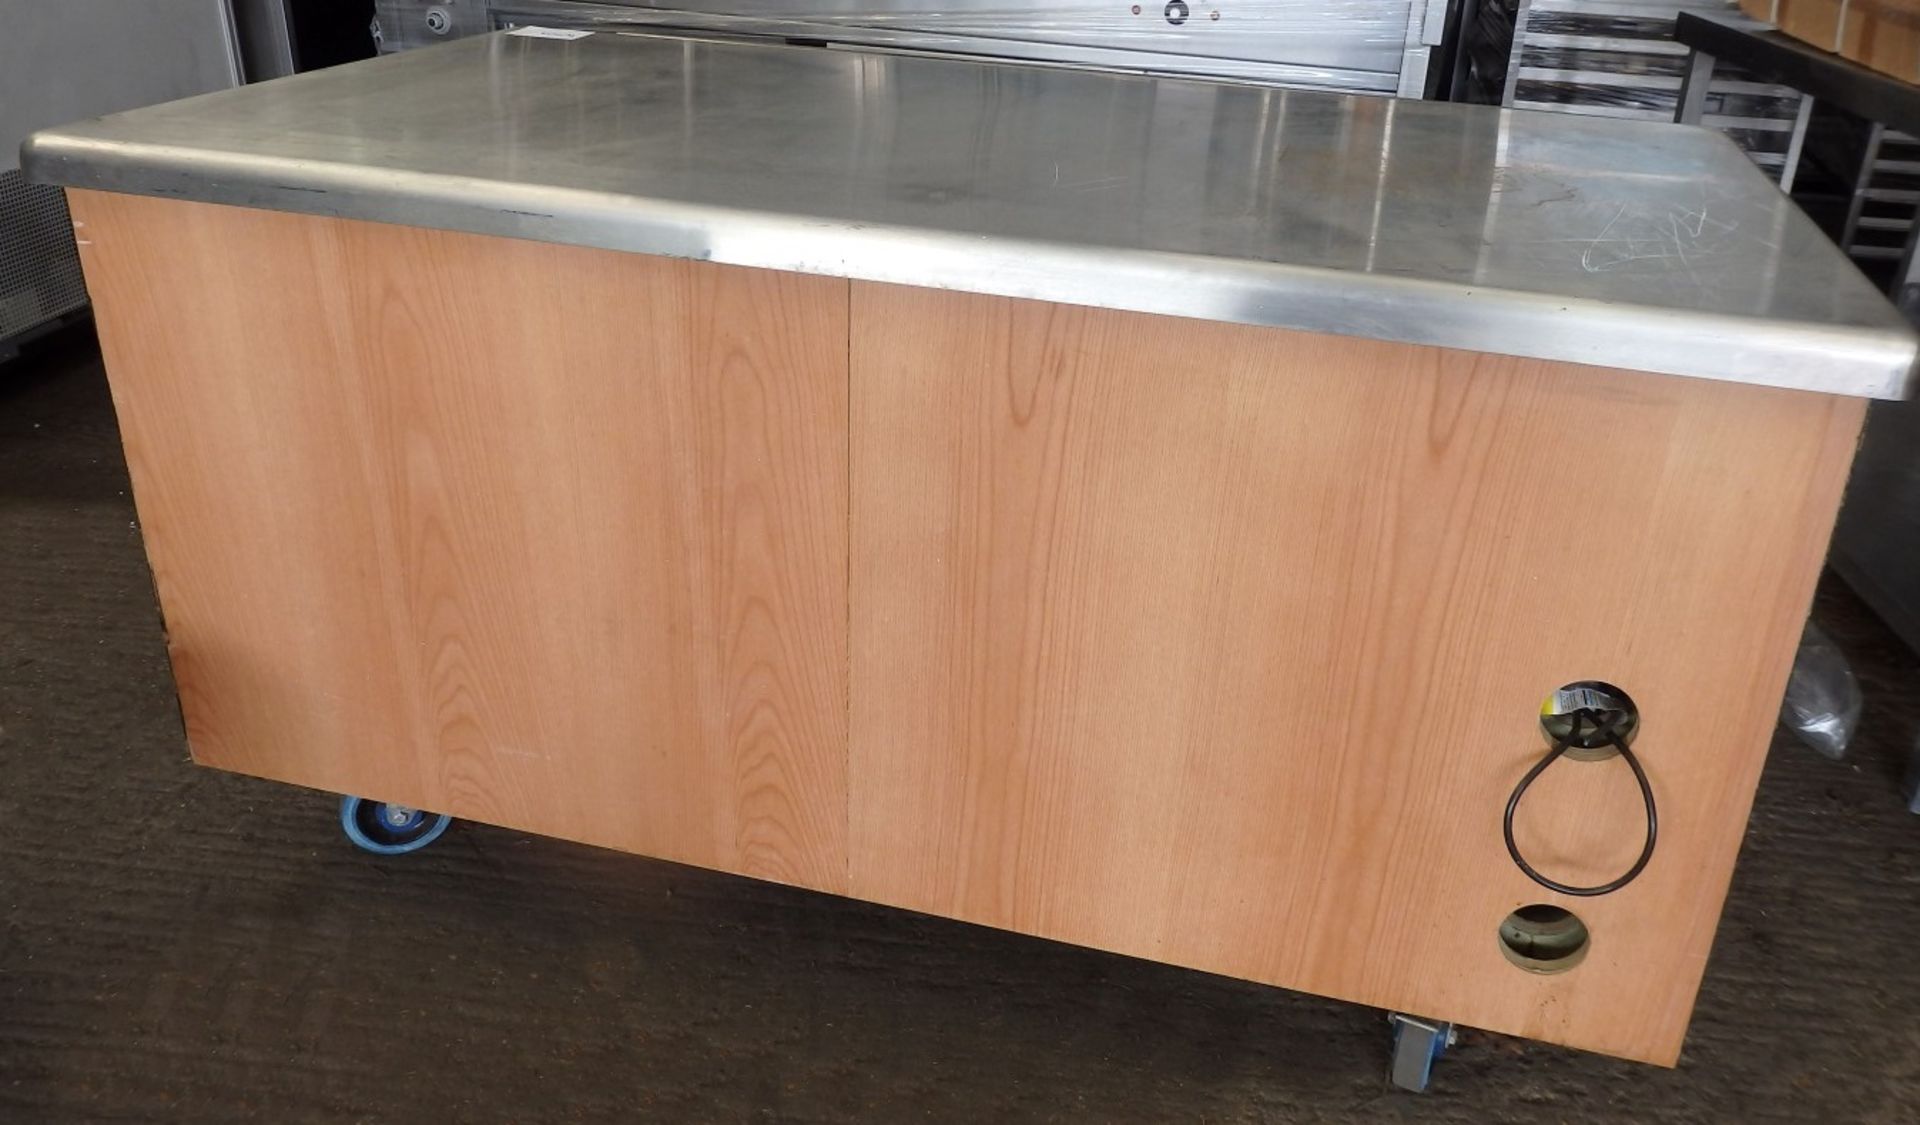 1 x Serving Counter With Front Storage - On Castors For Maneuverability - Ideal For Pub Carvery, - Image 2 of 2